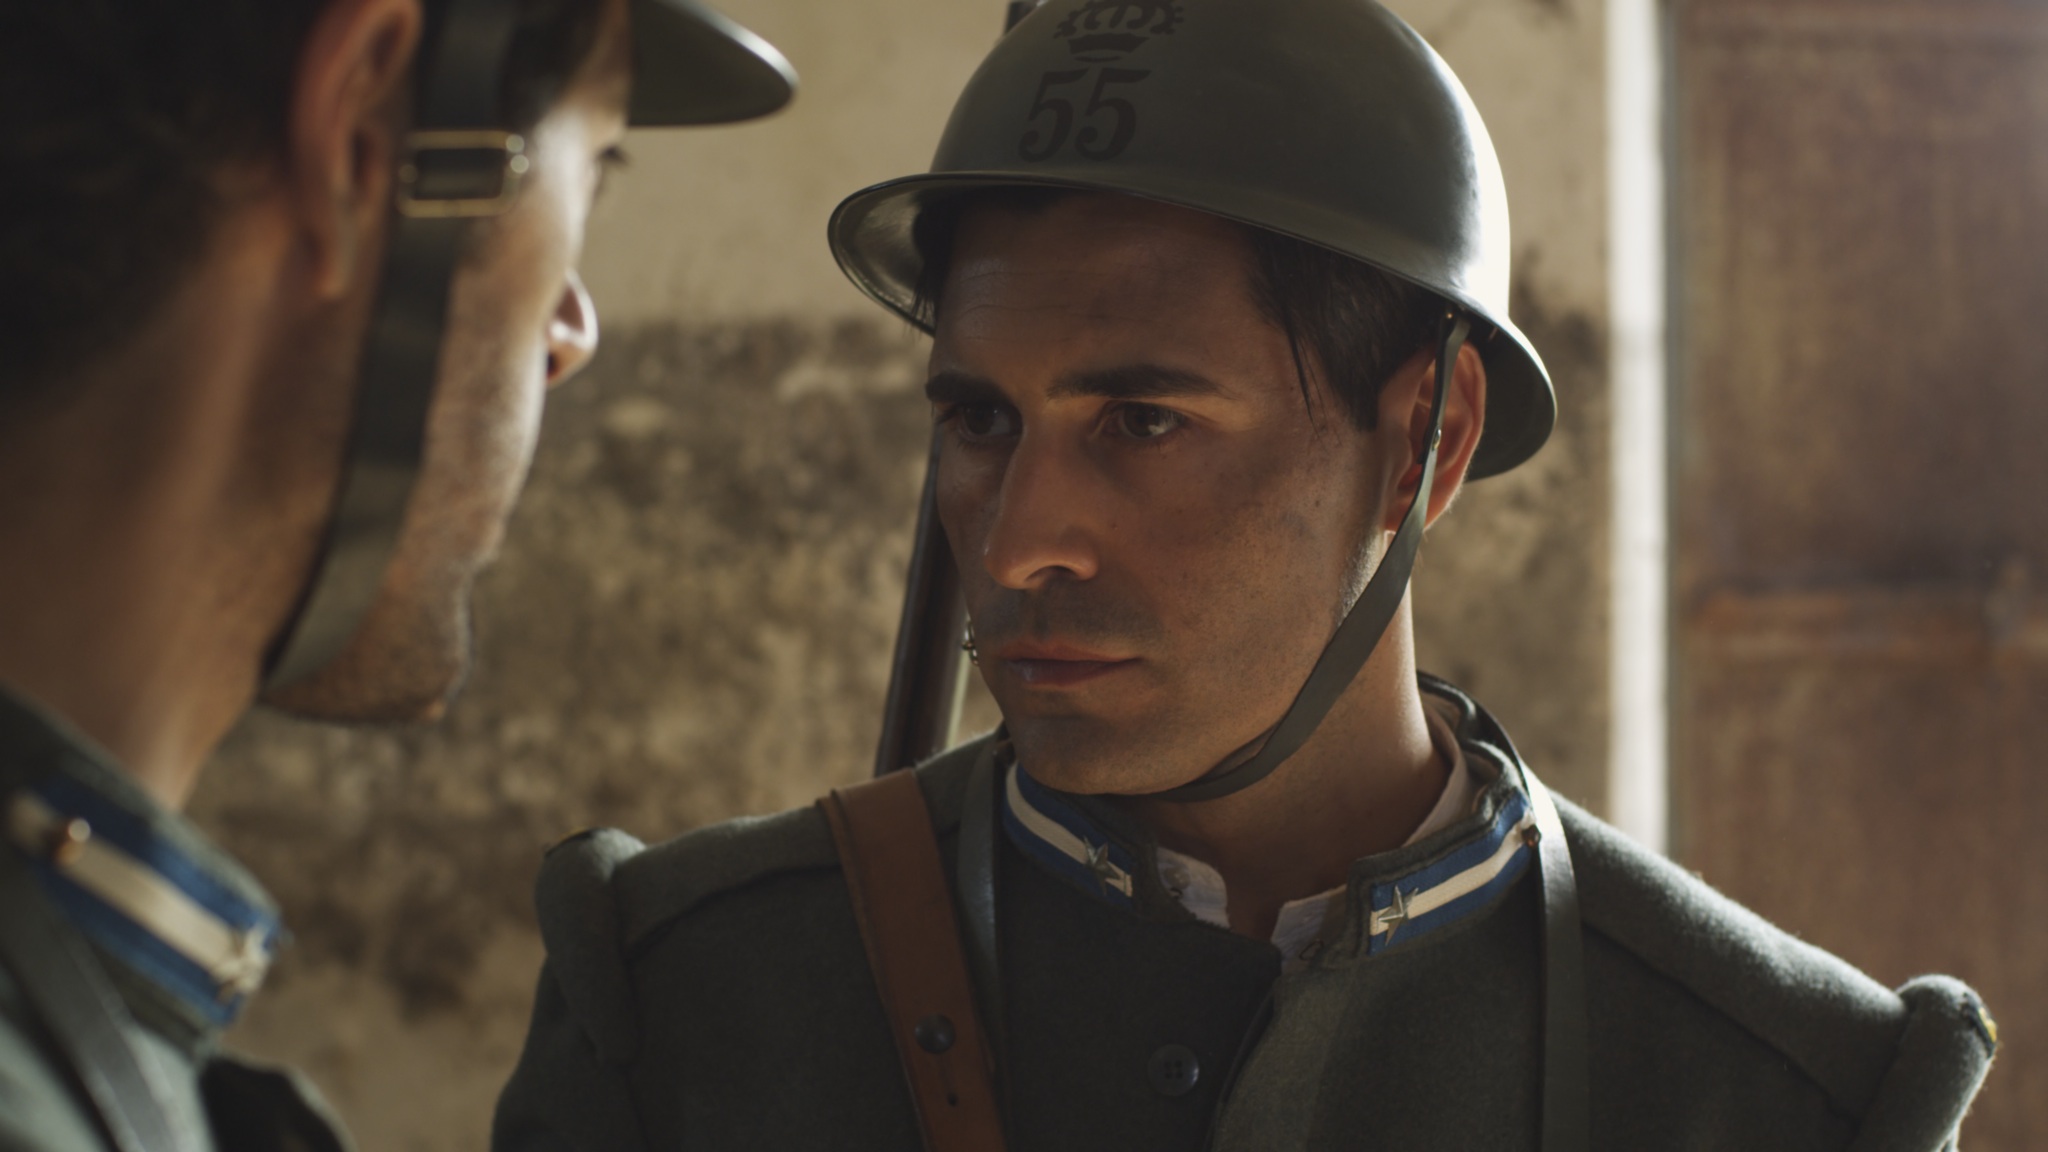 Maximiliano Hernando Bruno is an Italian Caporal (Amedeo) in the movie about the life of Hemingway during the first world war in Italy.